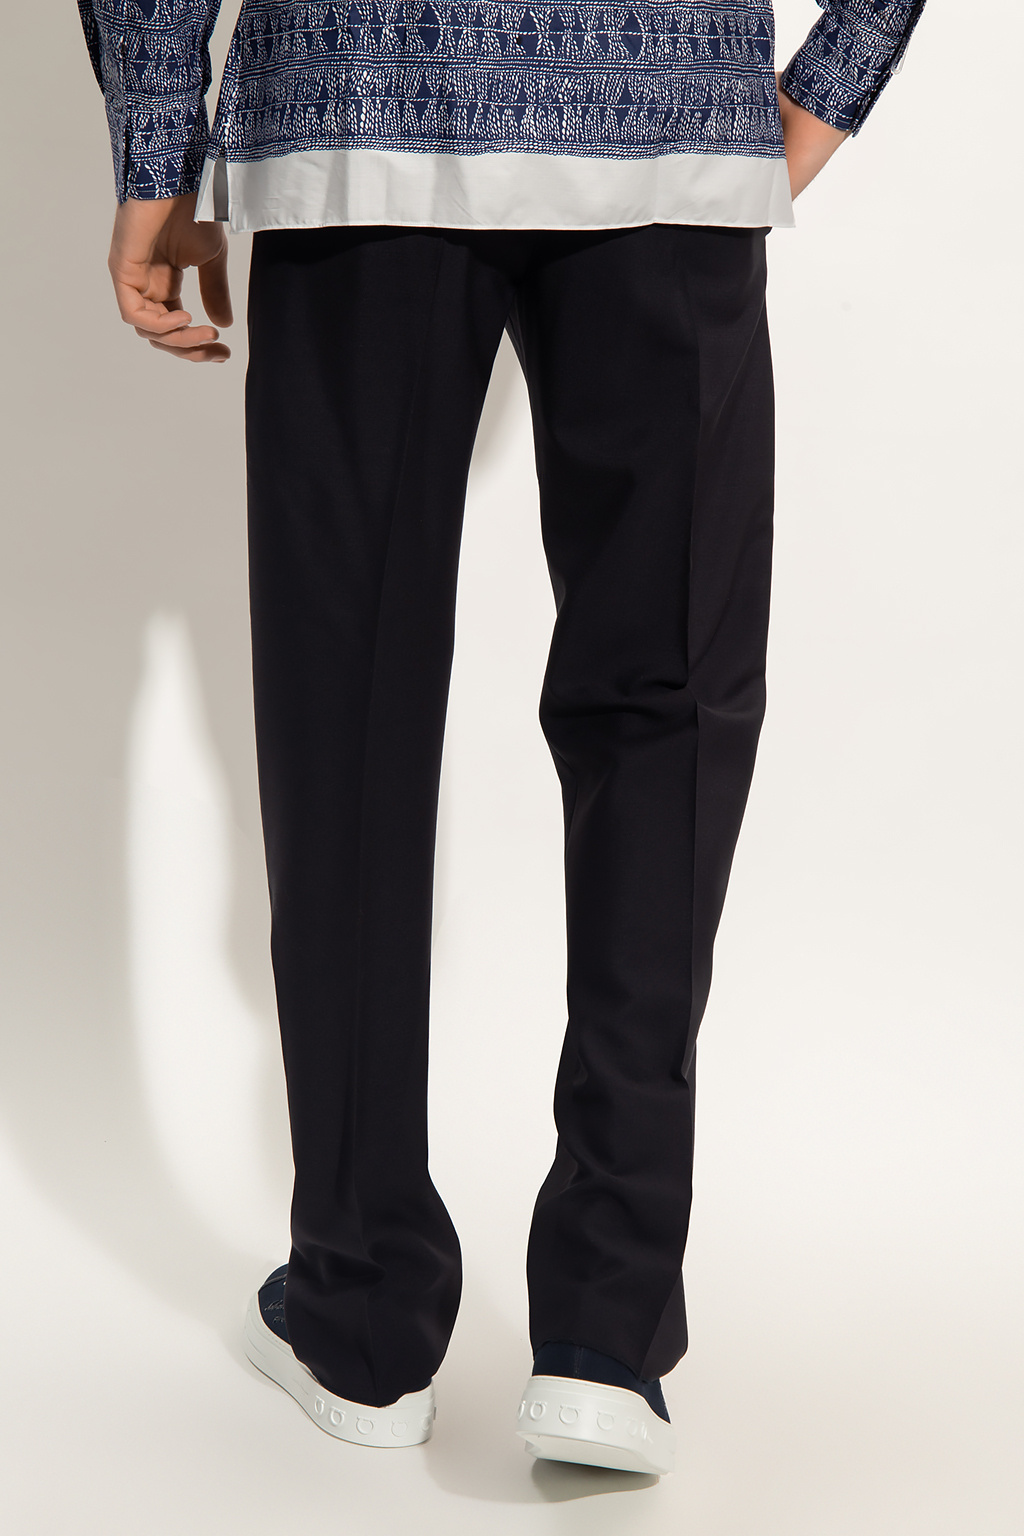 Salvatore Ferragamo Trousers with stitching details